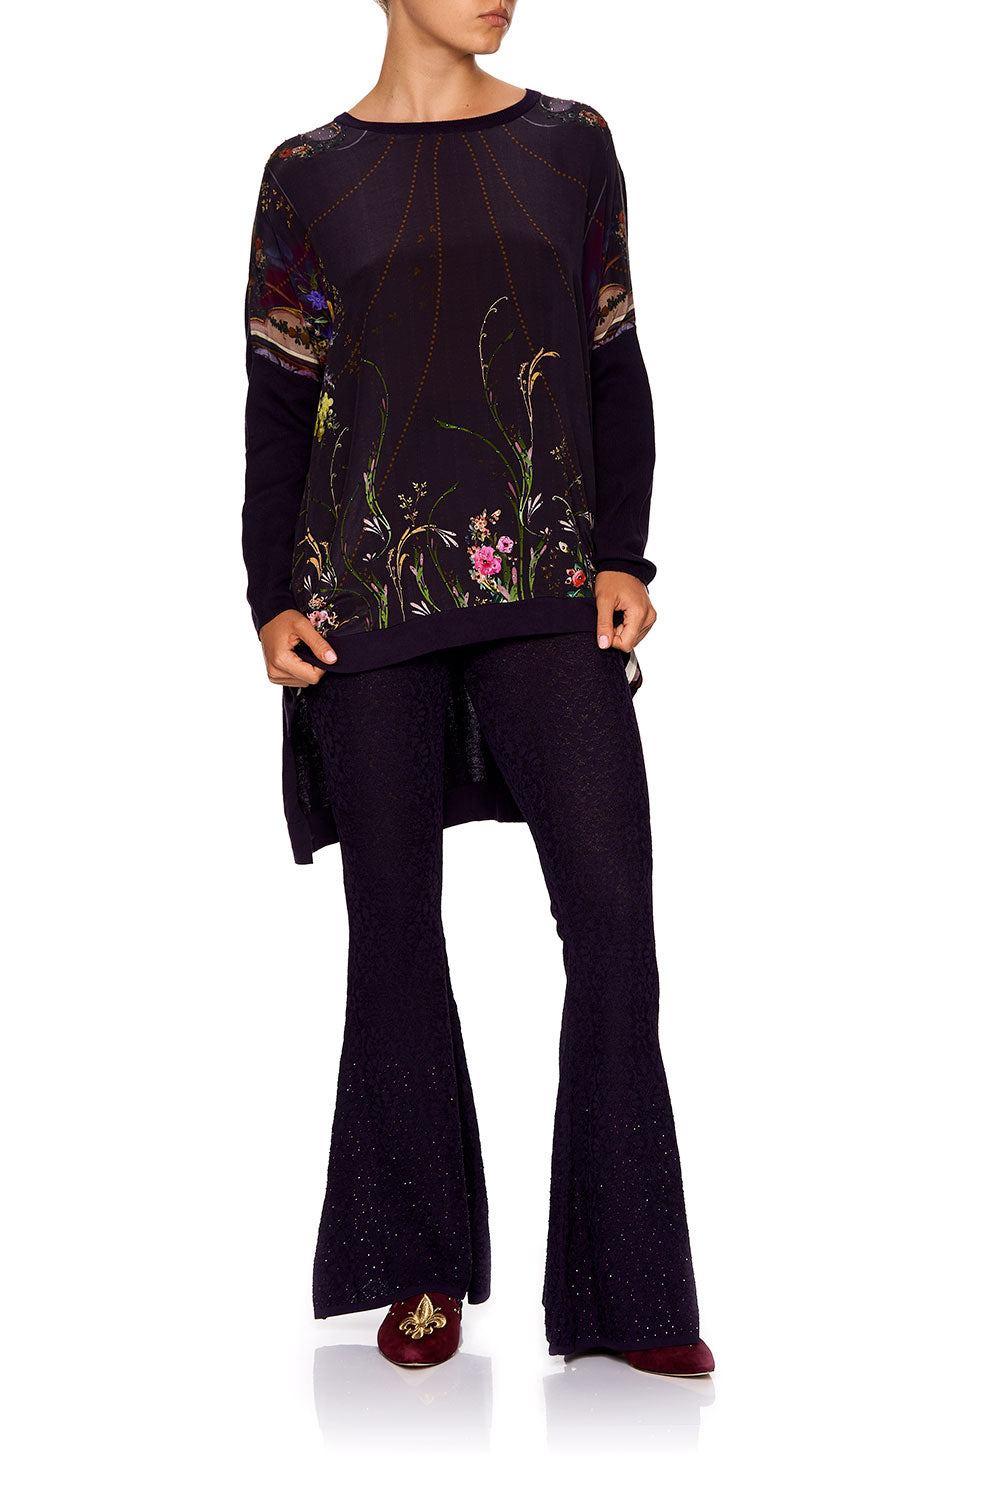 LACE KNIT FLARE PANT WILD FLOWER